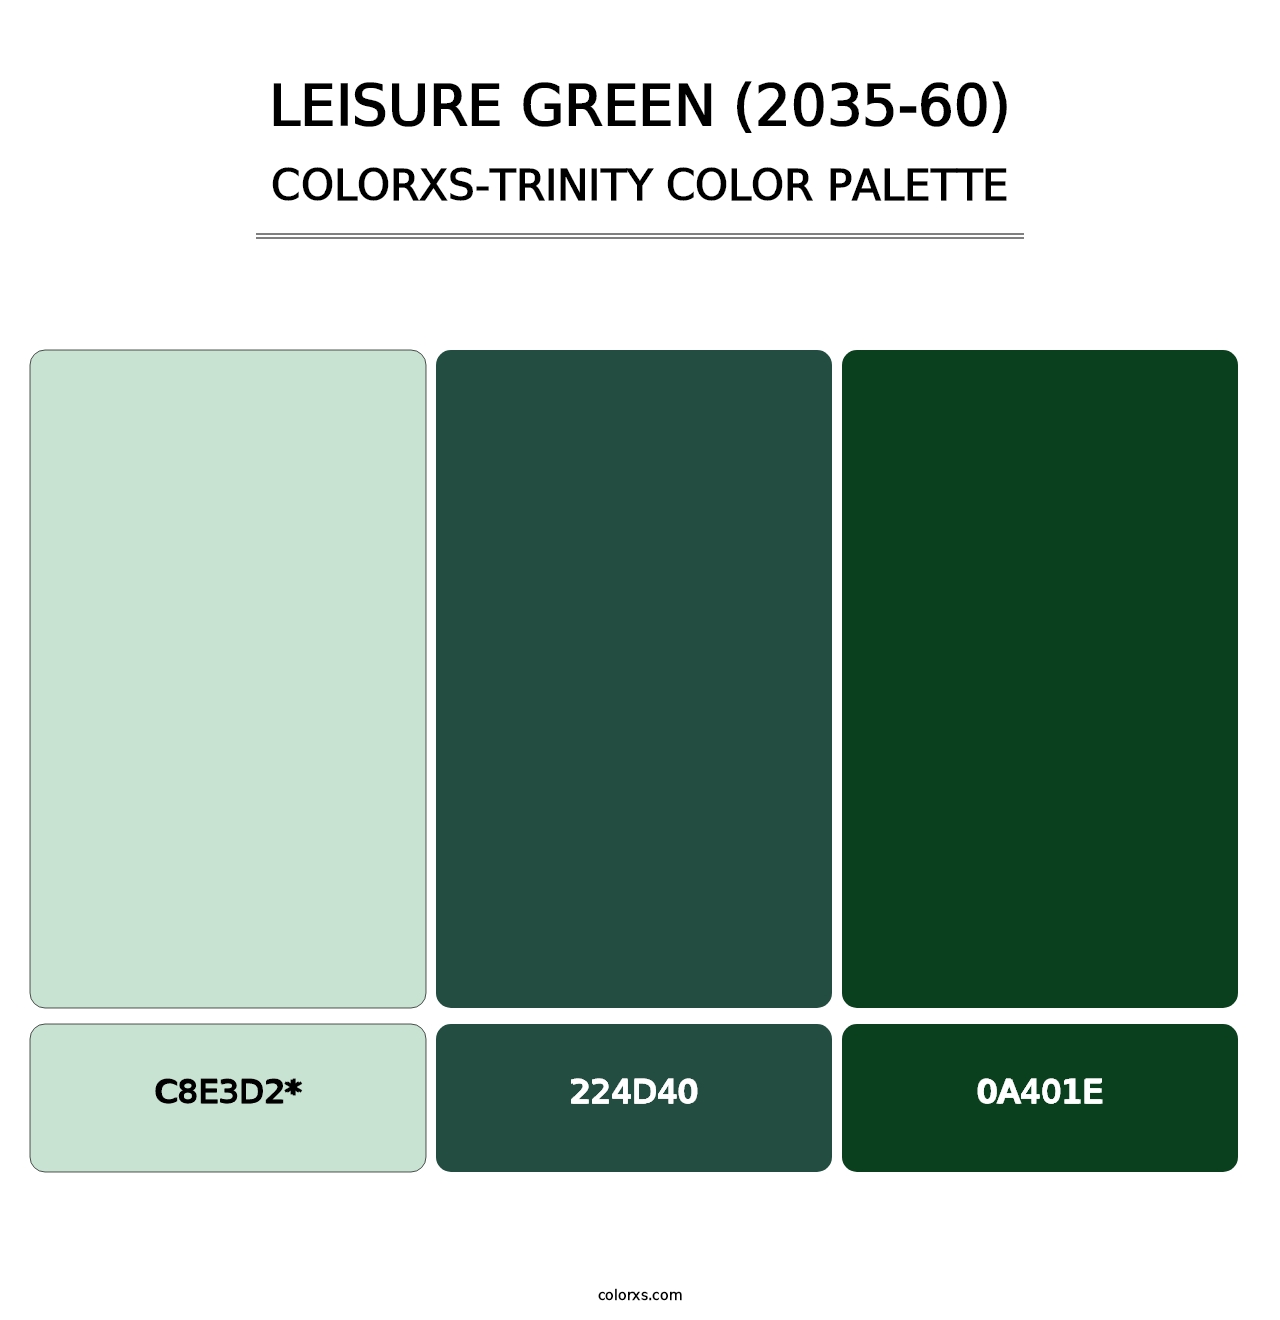 Leisure Green (2035-60) - Colorxs Trinity Palette